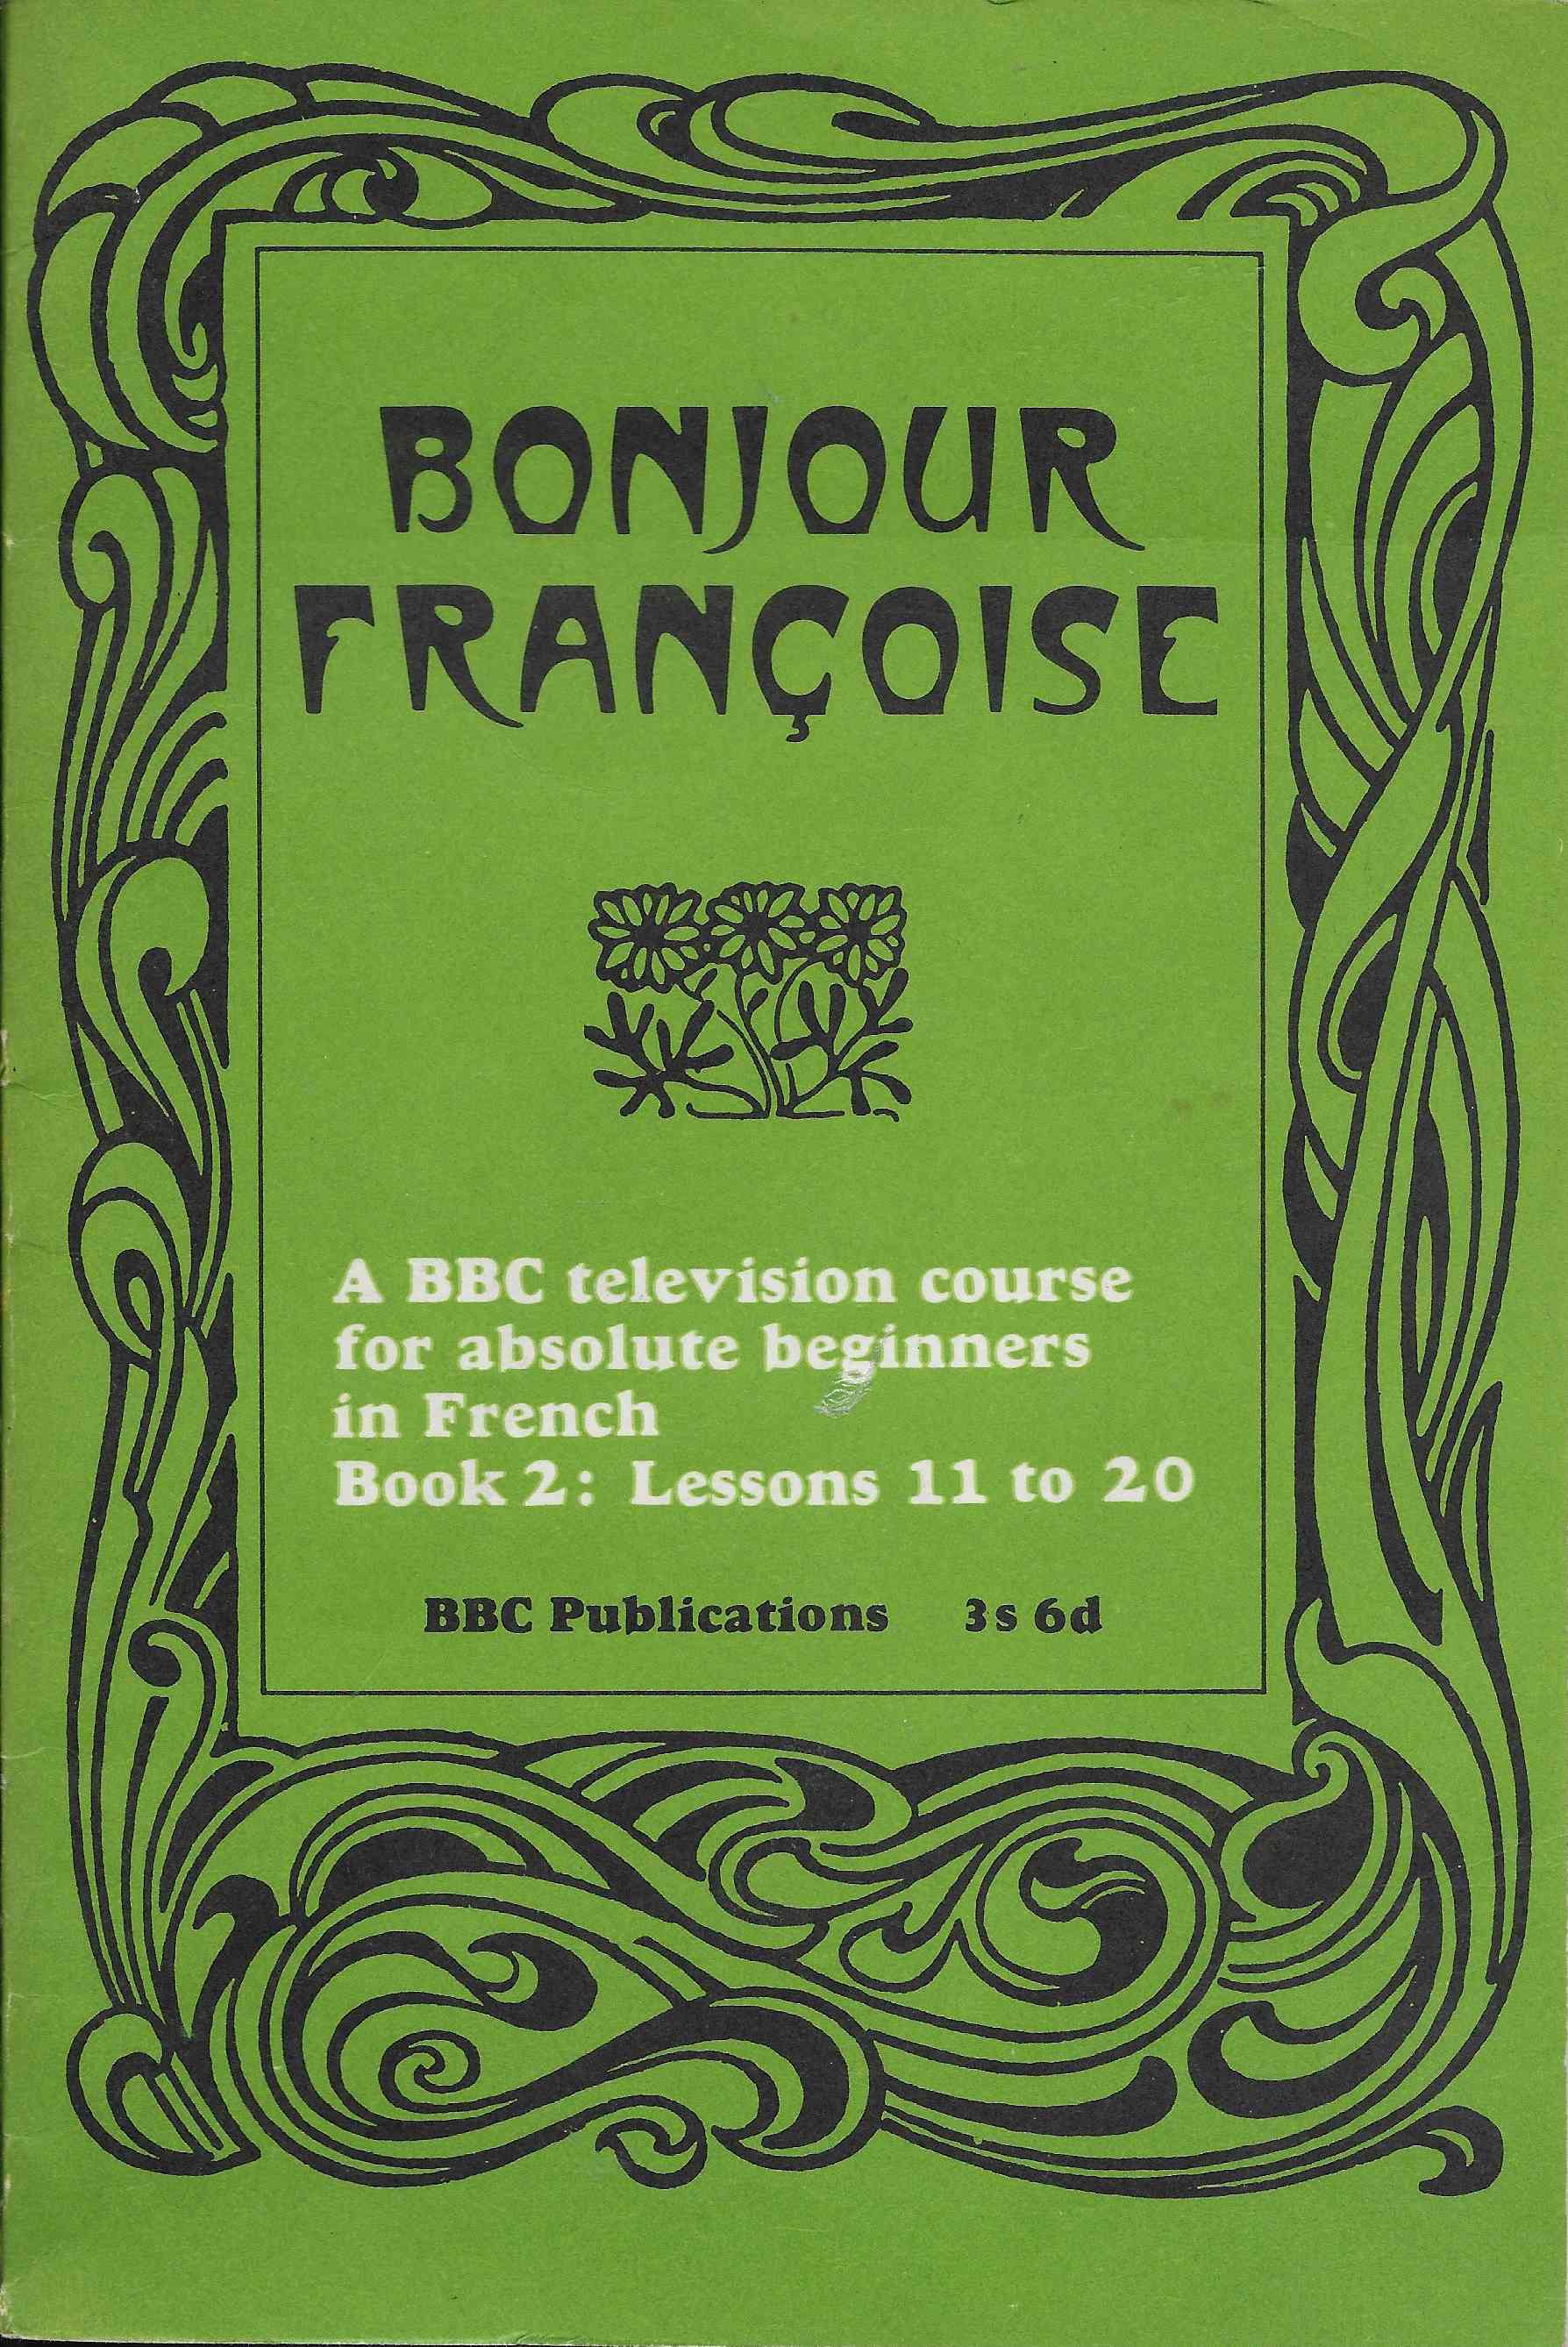 Picture of Bonjour Francoise - Book 2 by artist Michel Faure from the BBC books - Records and Tapes library